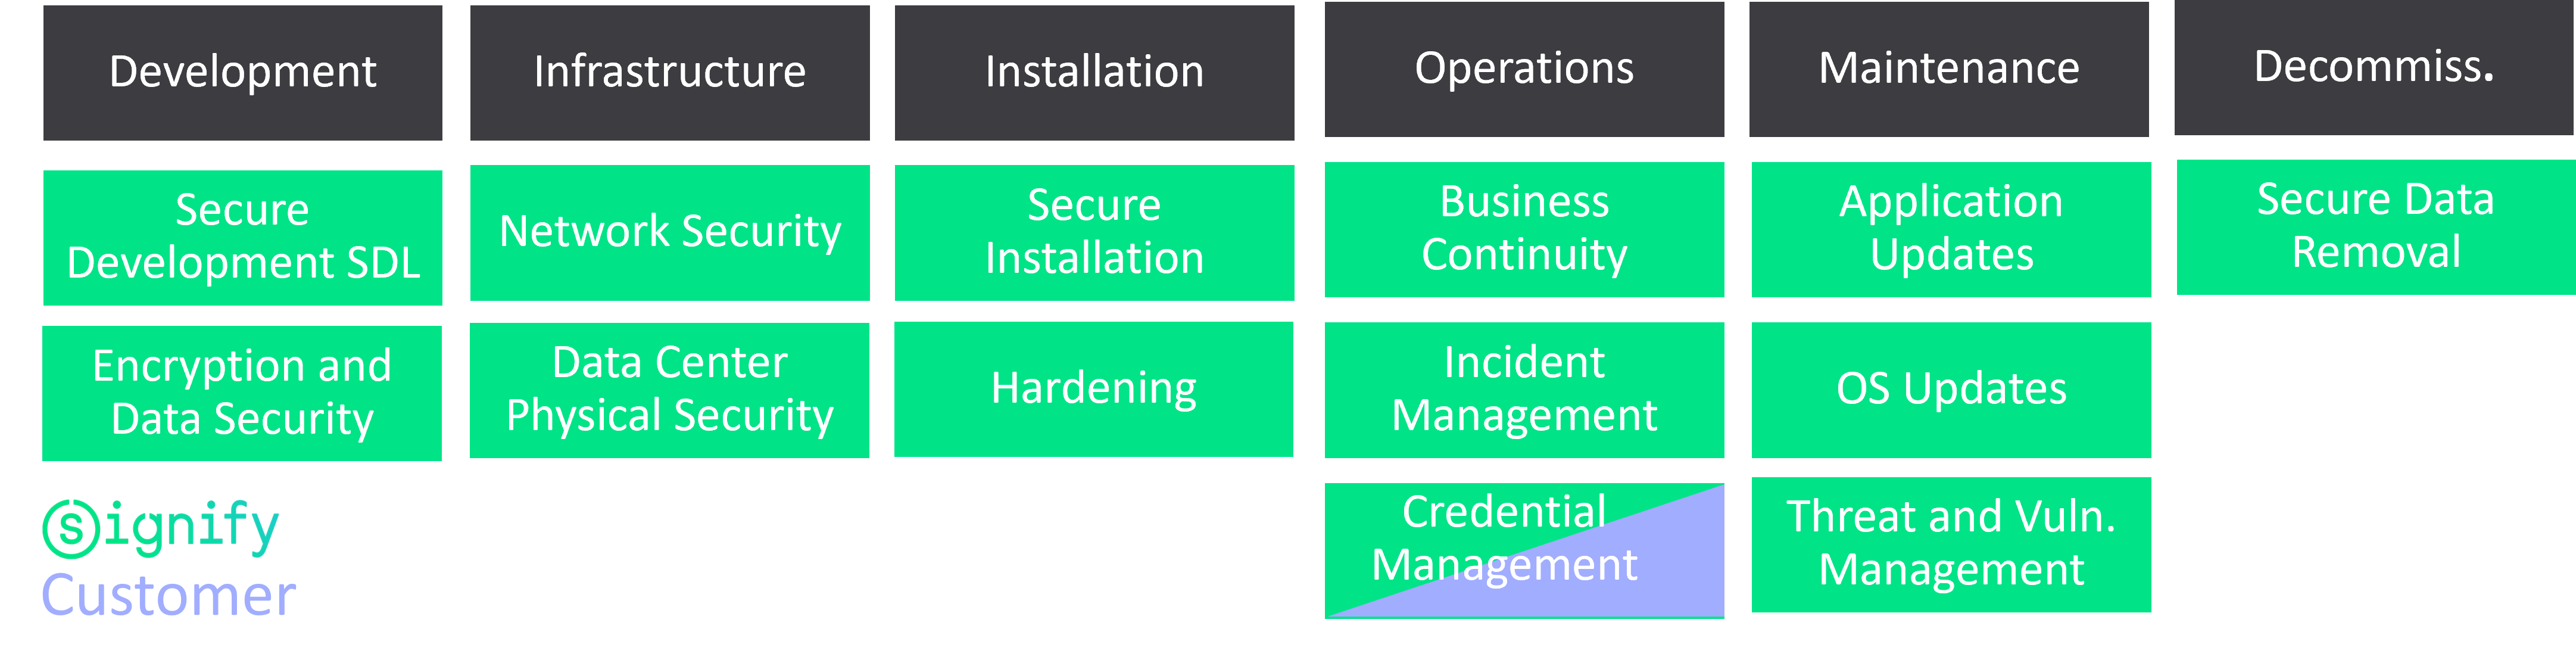 RESPONSIBILITIES FOR CLOUD COMPONENTS (GREEN FOR SIGNIFY, BLUE FOR CUSTOMER